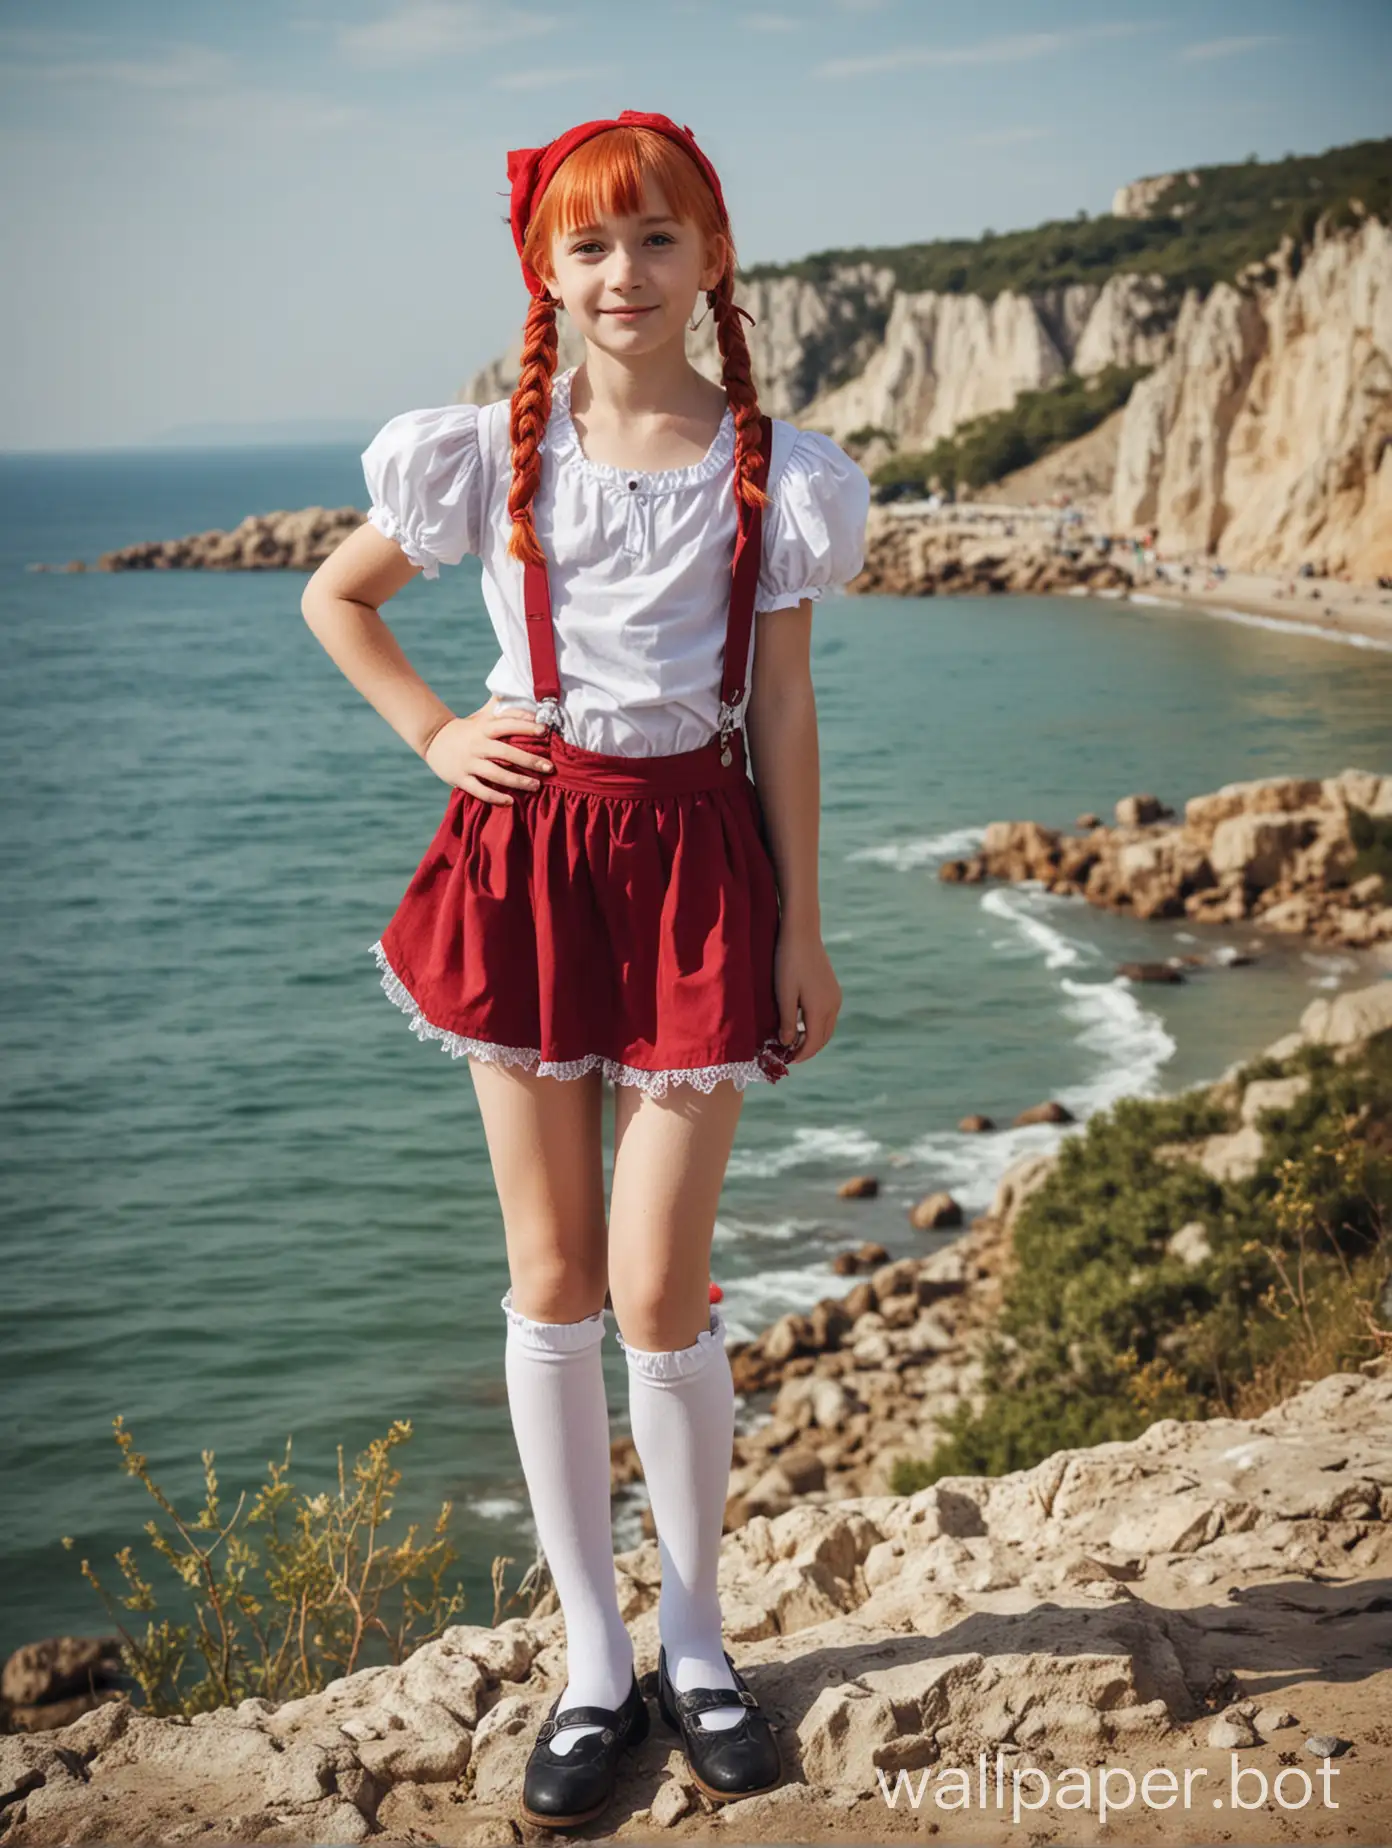 Cosplaying-10YearOld-Girl-with-Pippi-Longstocking-Theme-by-the-Crimea-Sea